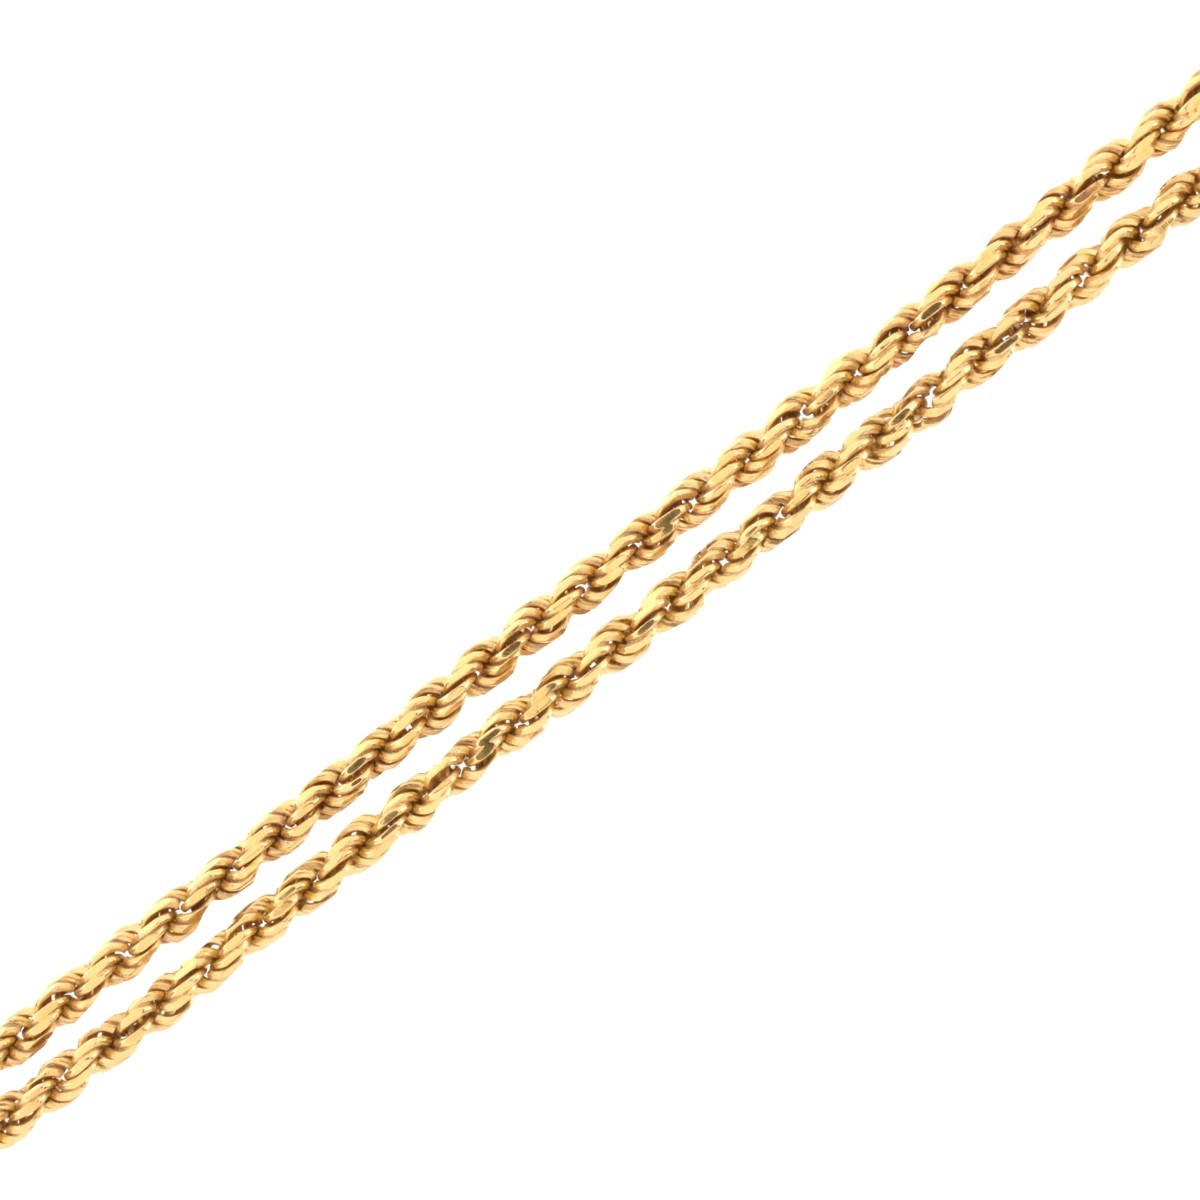 14K Necklace / Chain